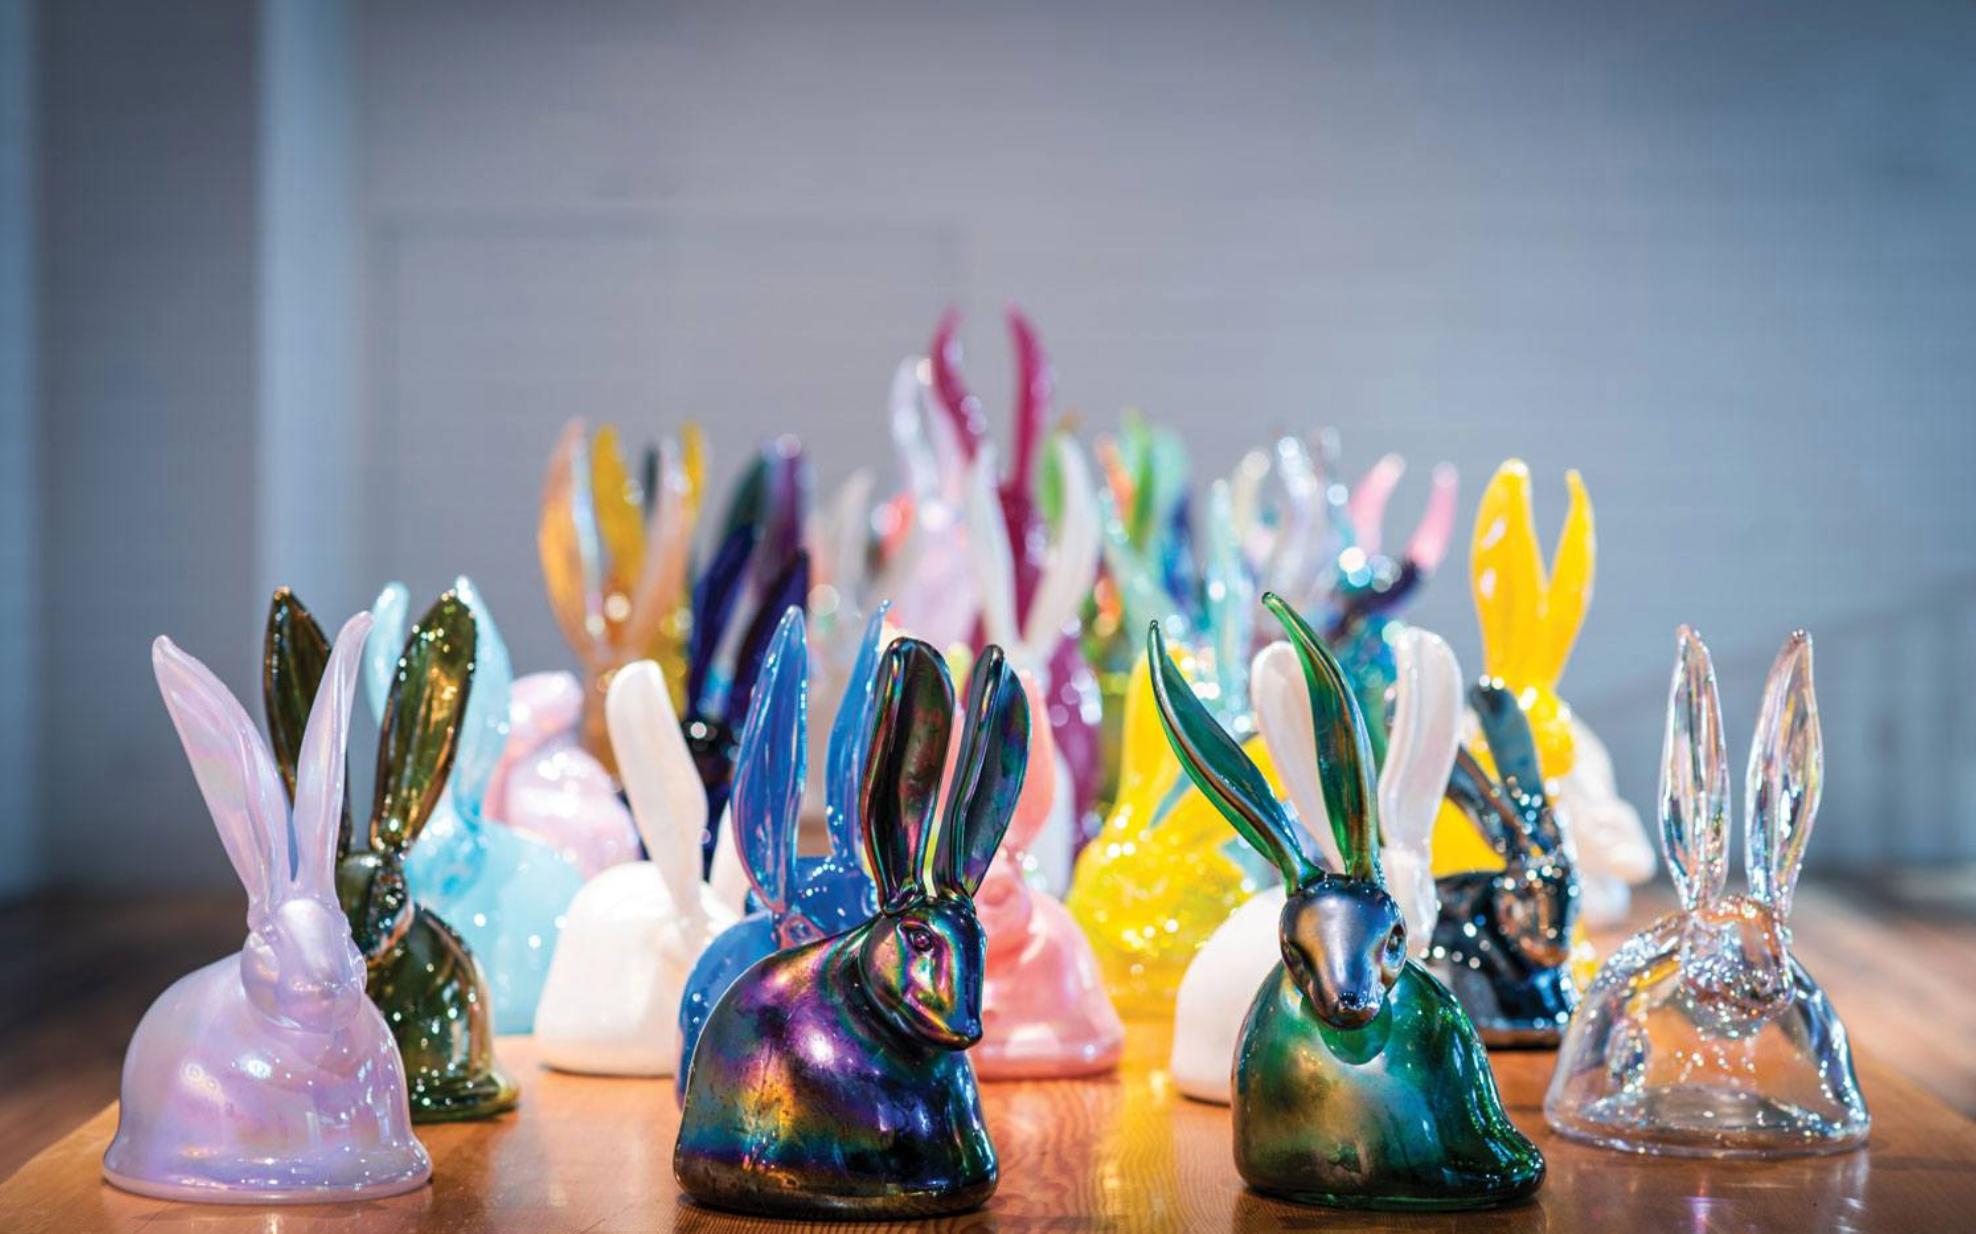 From canvas to kiln, Hunt Slonem brings his signature subject to life like never before. This wonderful hand-blown sculpture depicts one of Slonem's signature bunnies in an iridescent bright blue glass. Slonem’s new blown-glass sculptures are a